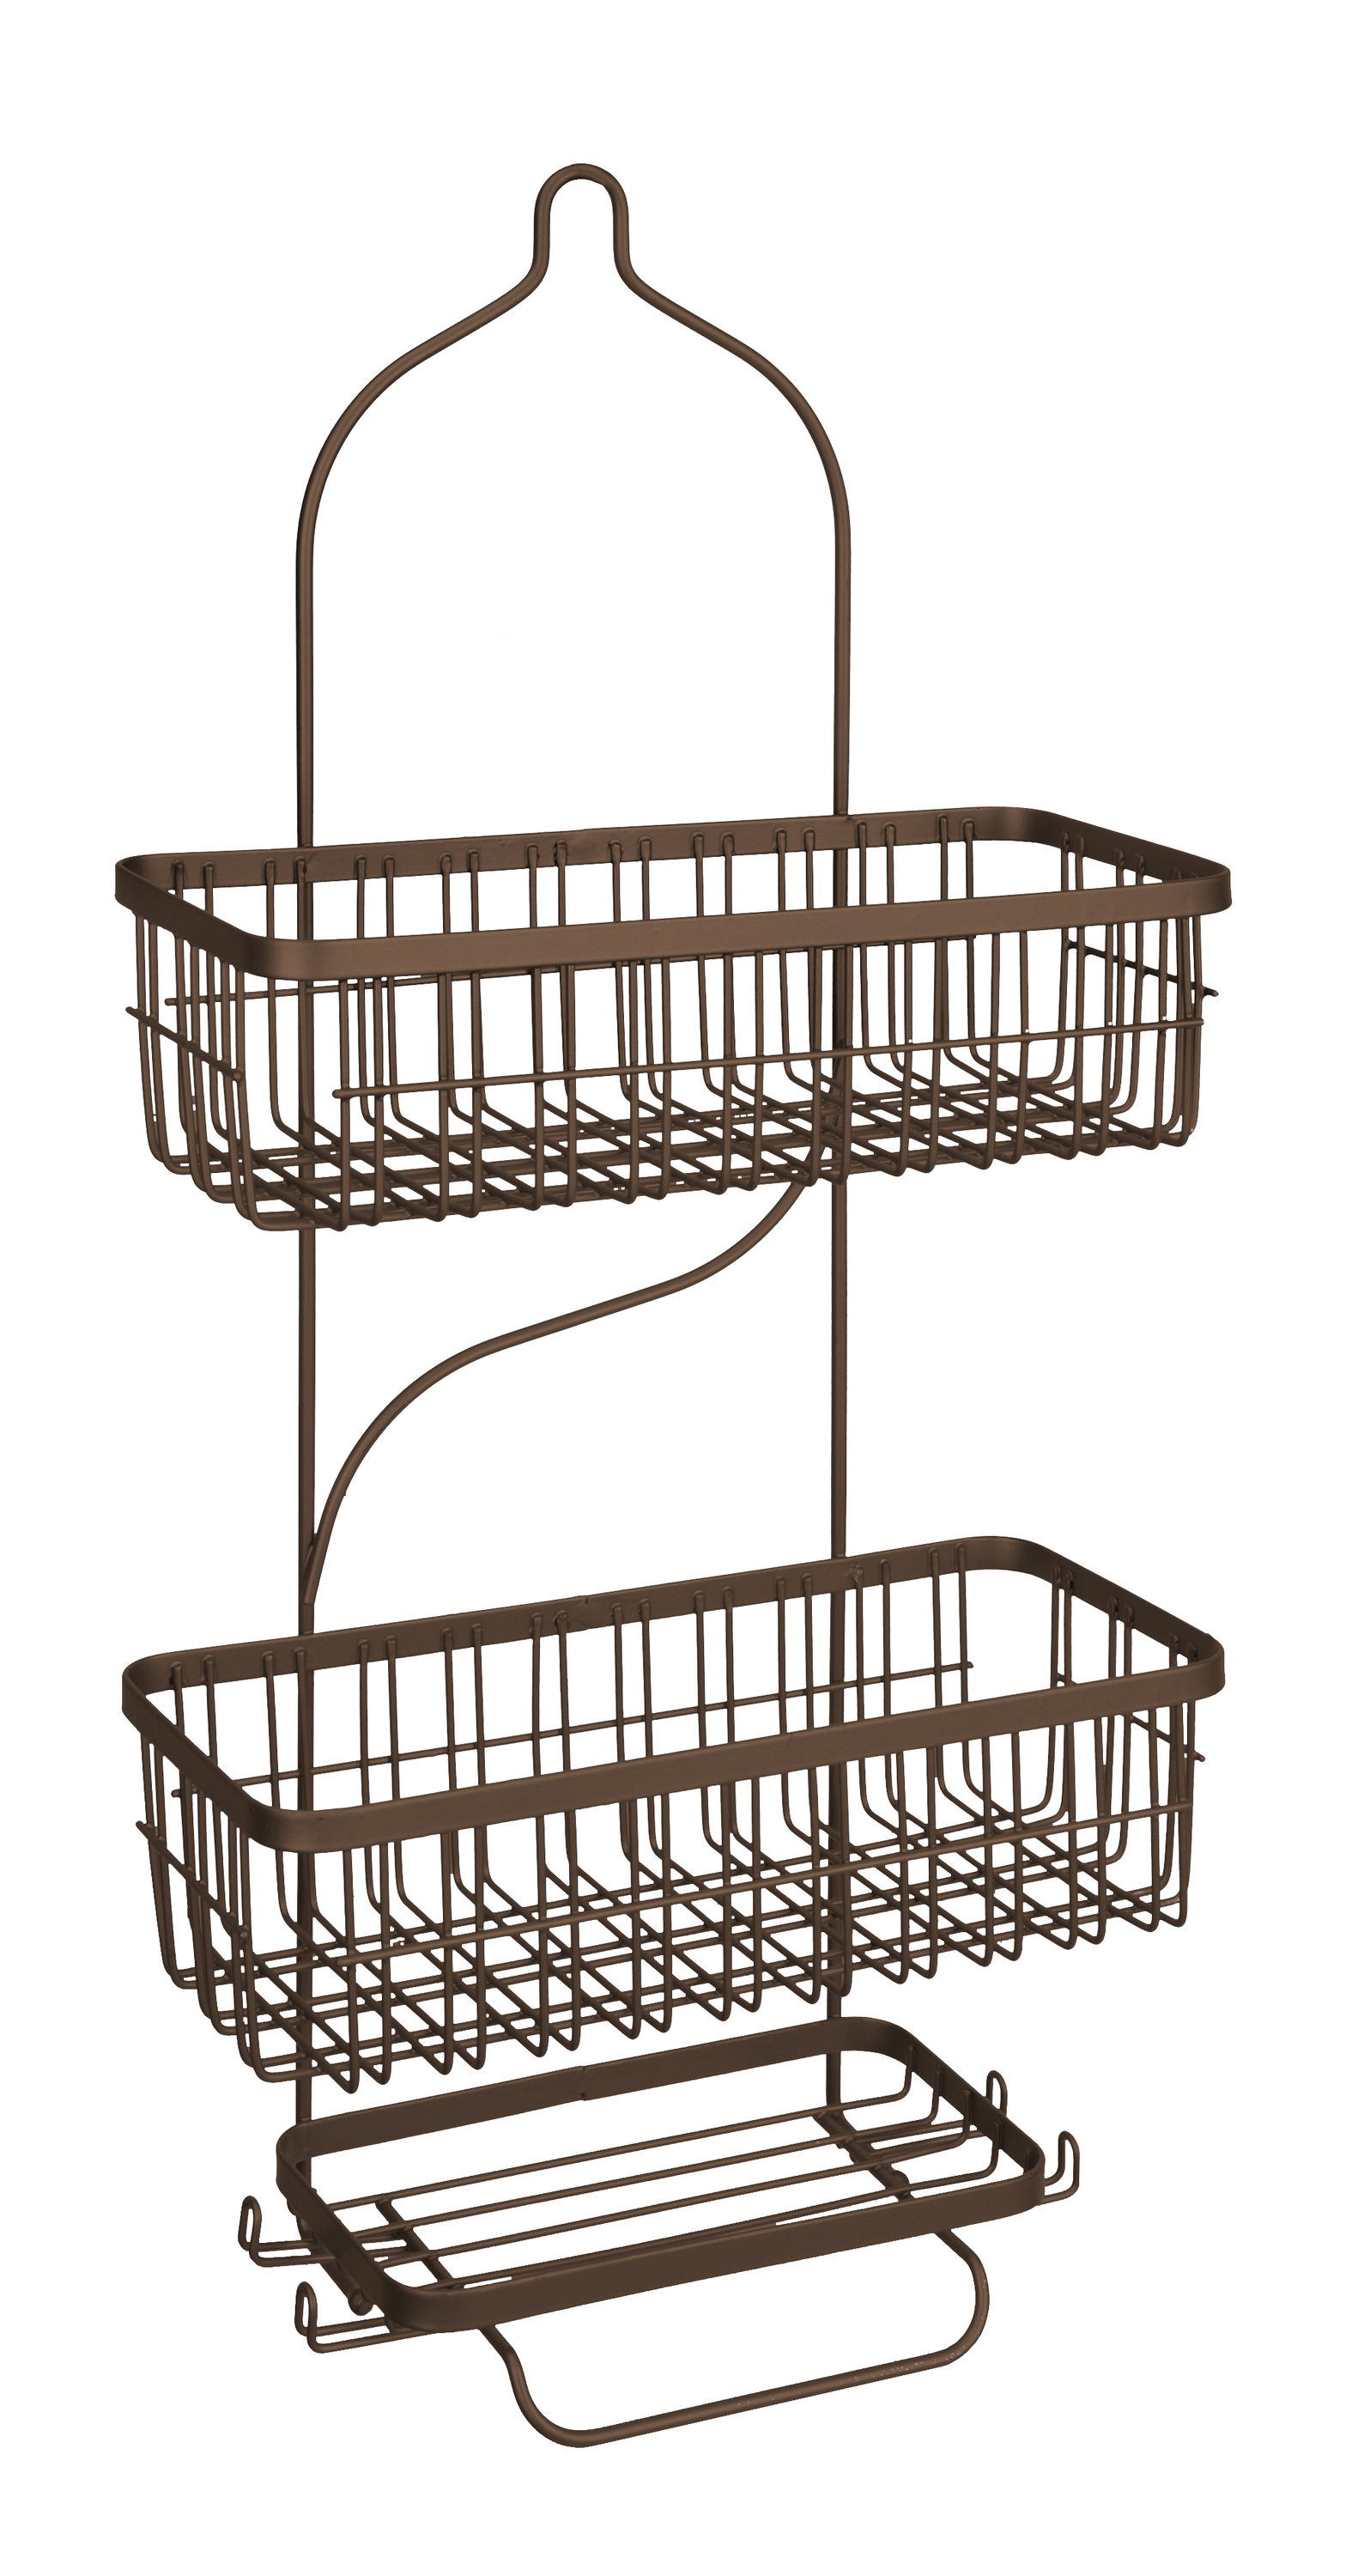 Oil Rubbed Bronze Steel 2-Shelf Hanging Shower Caddy 12-in x 5.1-in x 25.5-in | - Style Selections 41636L